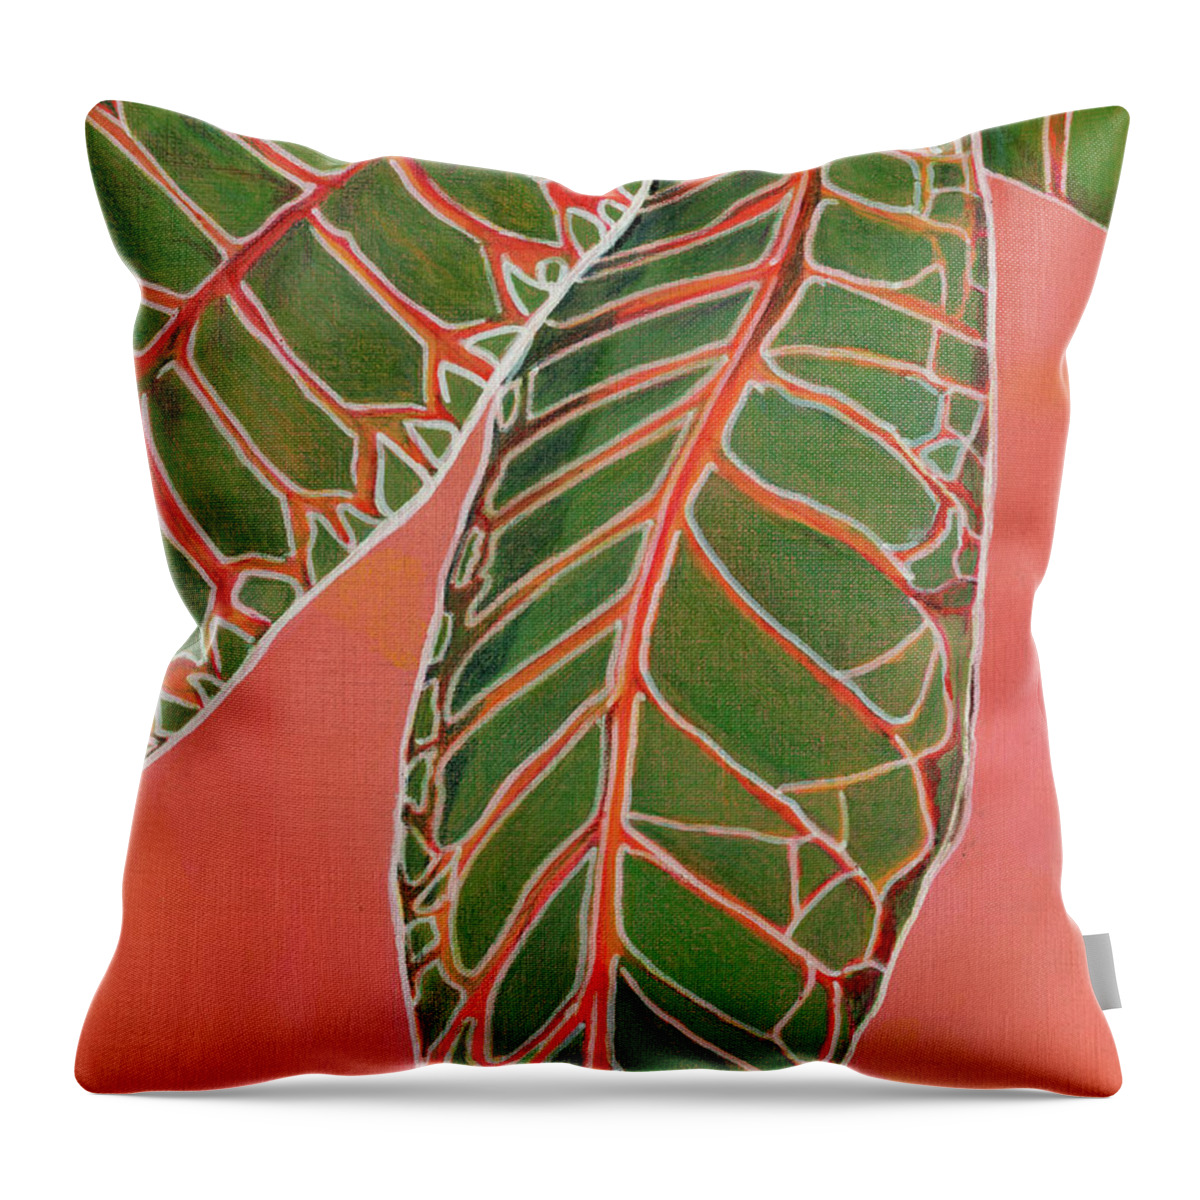 Plants Throw Pillow featuring the painting Crotons Catching by Amelia Stephenson at Ameliaworks